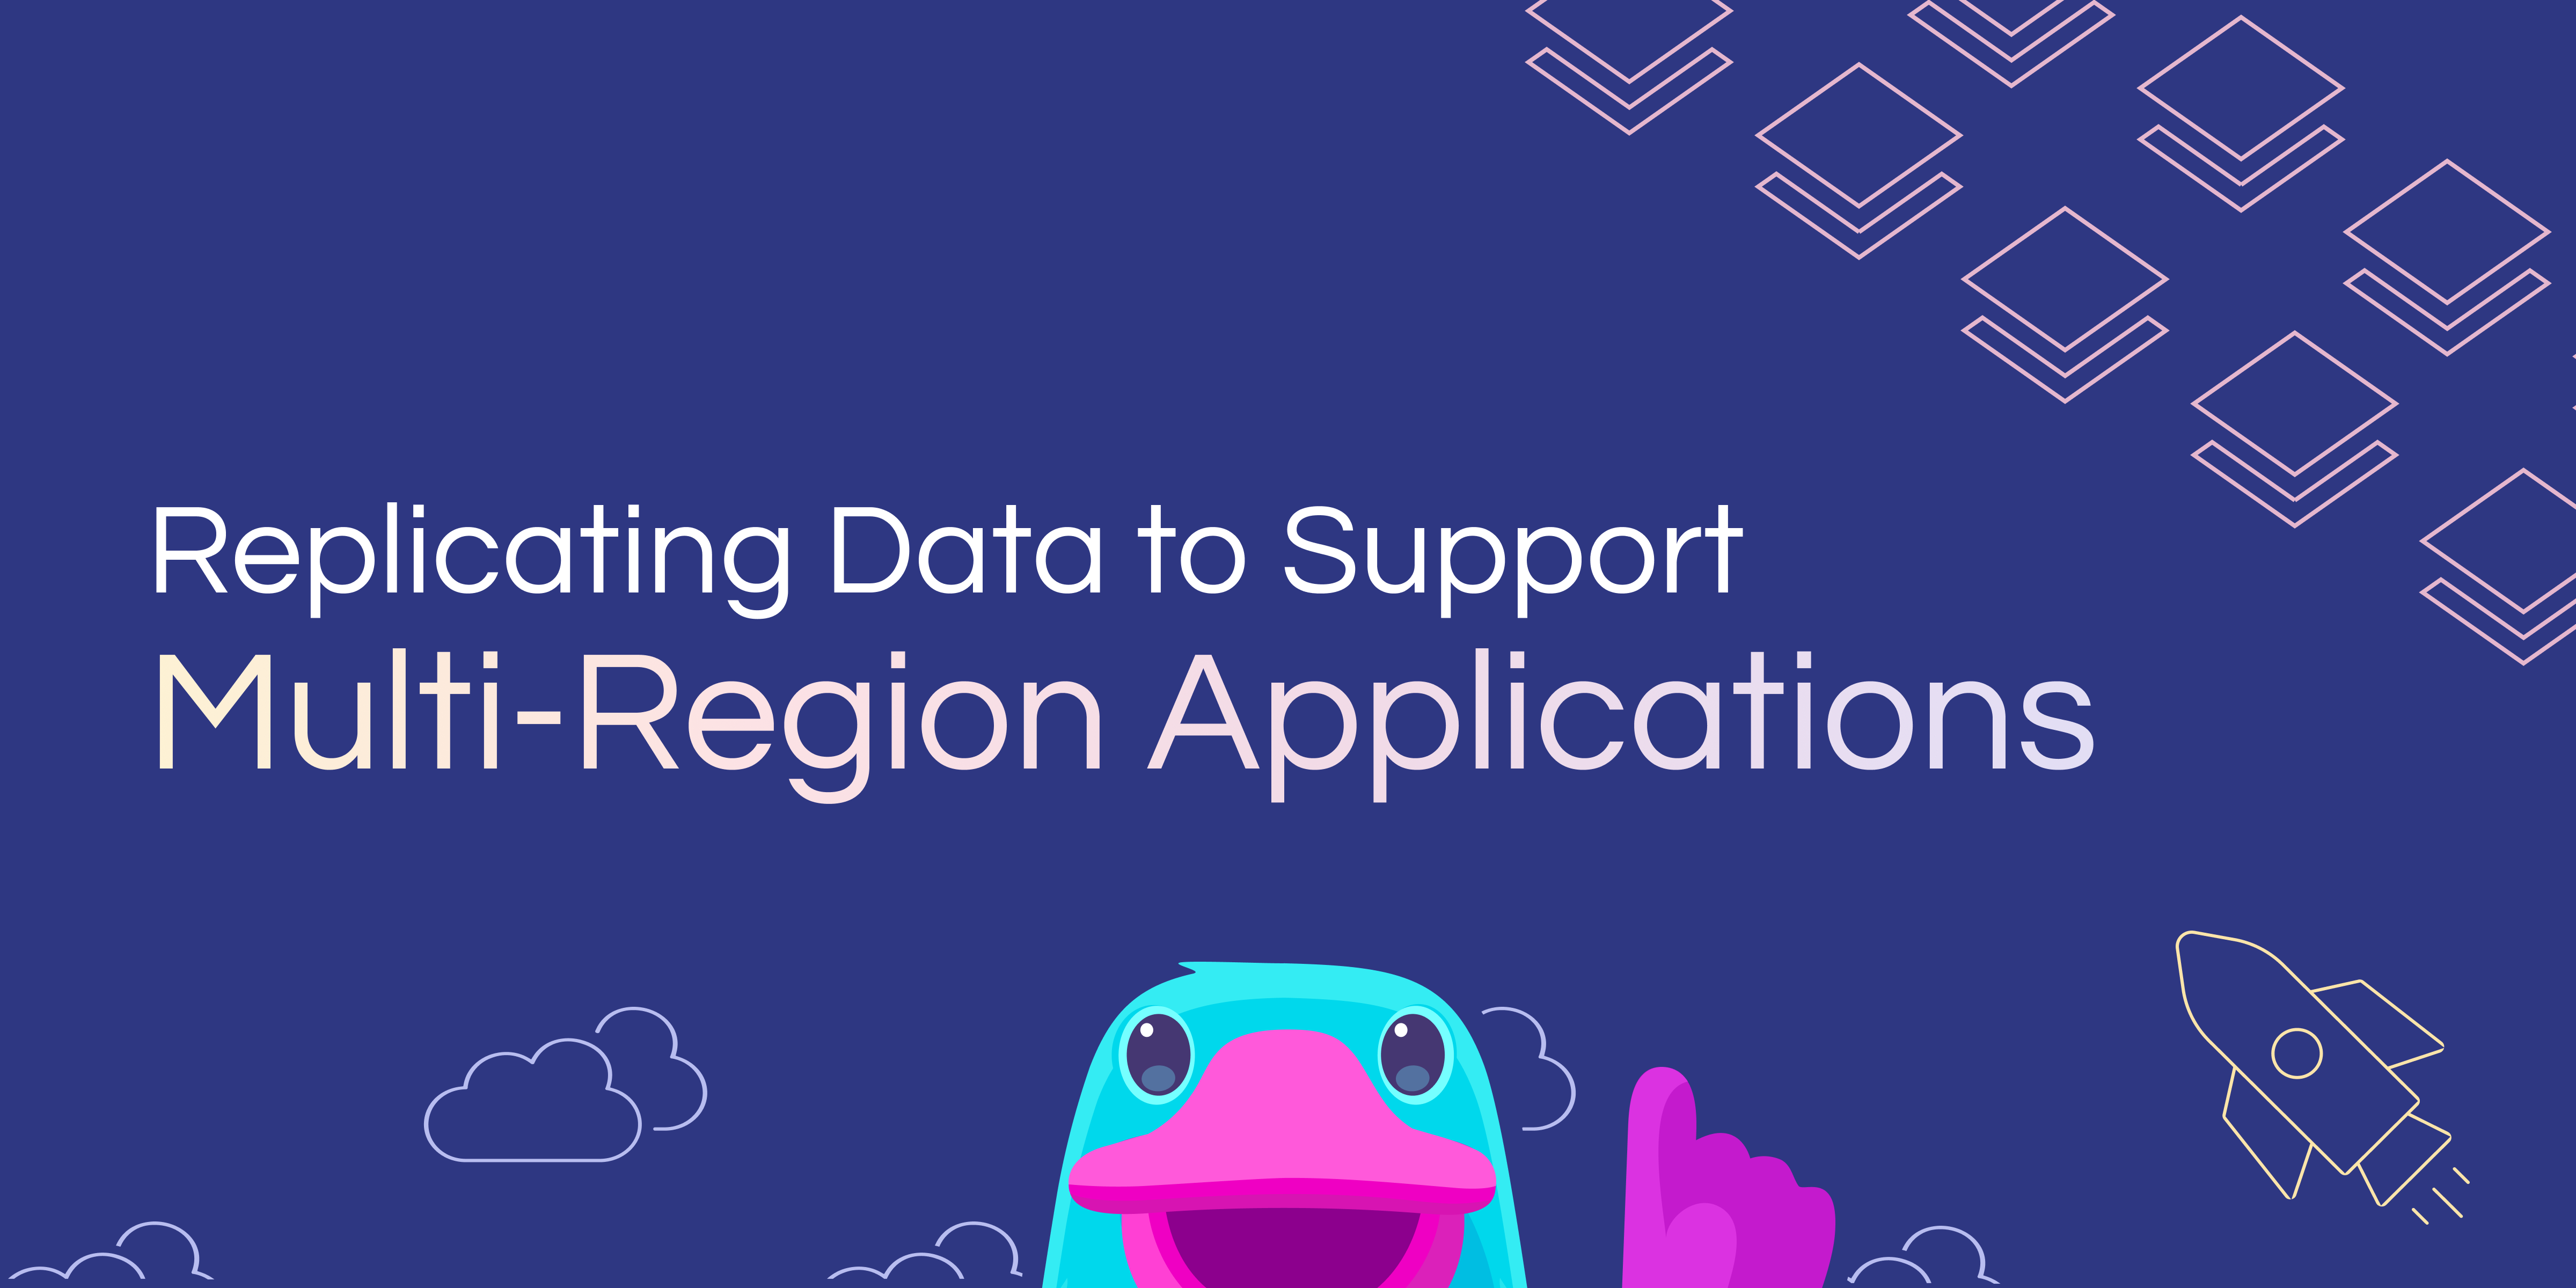 Replicating Data to Support Multi-Region Applications